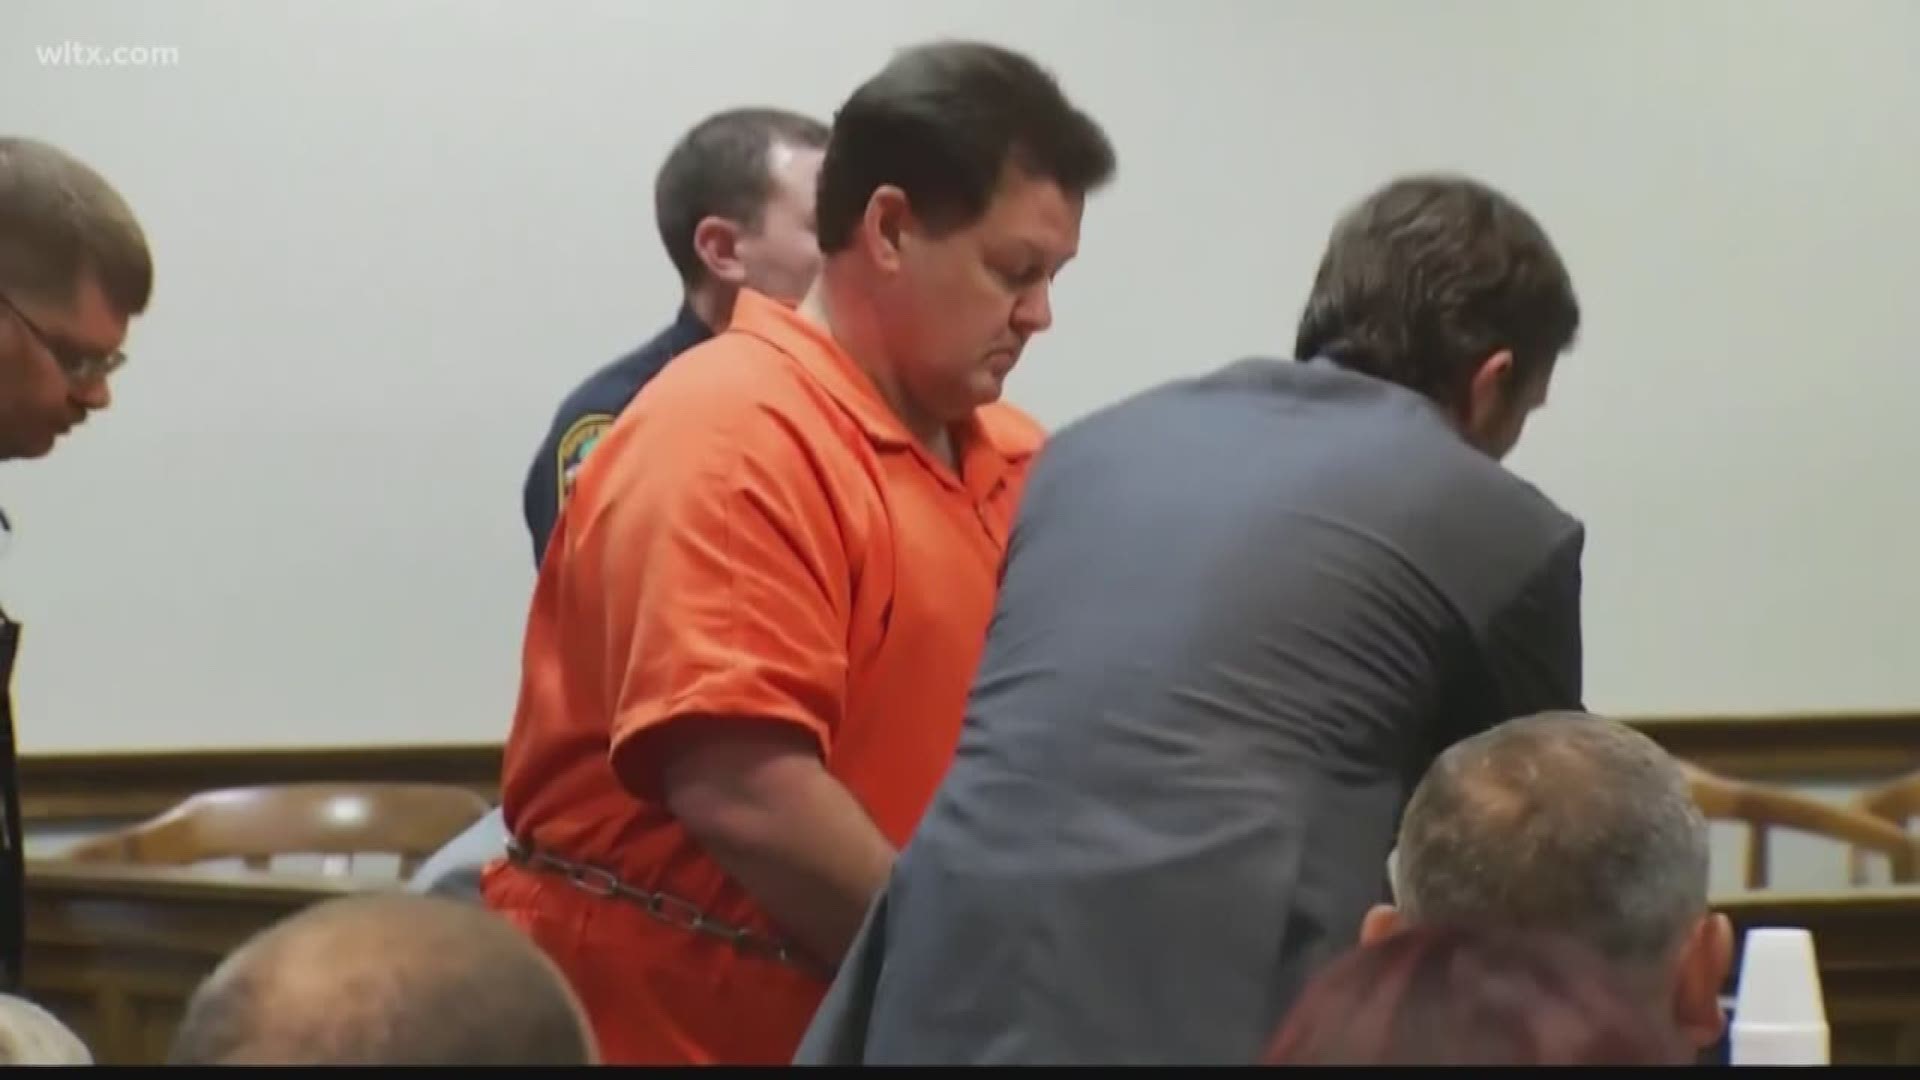 Todd Kohlhepp killed seven people. But now he says he's been mistreated behind bars.